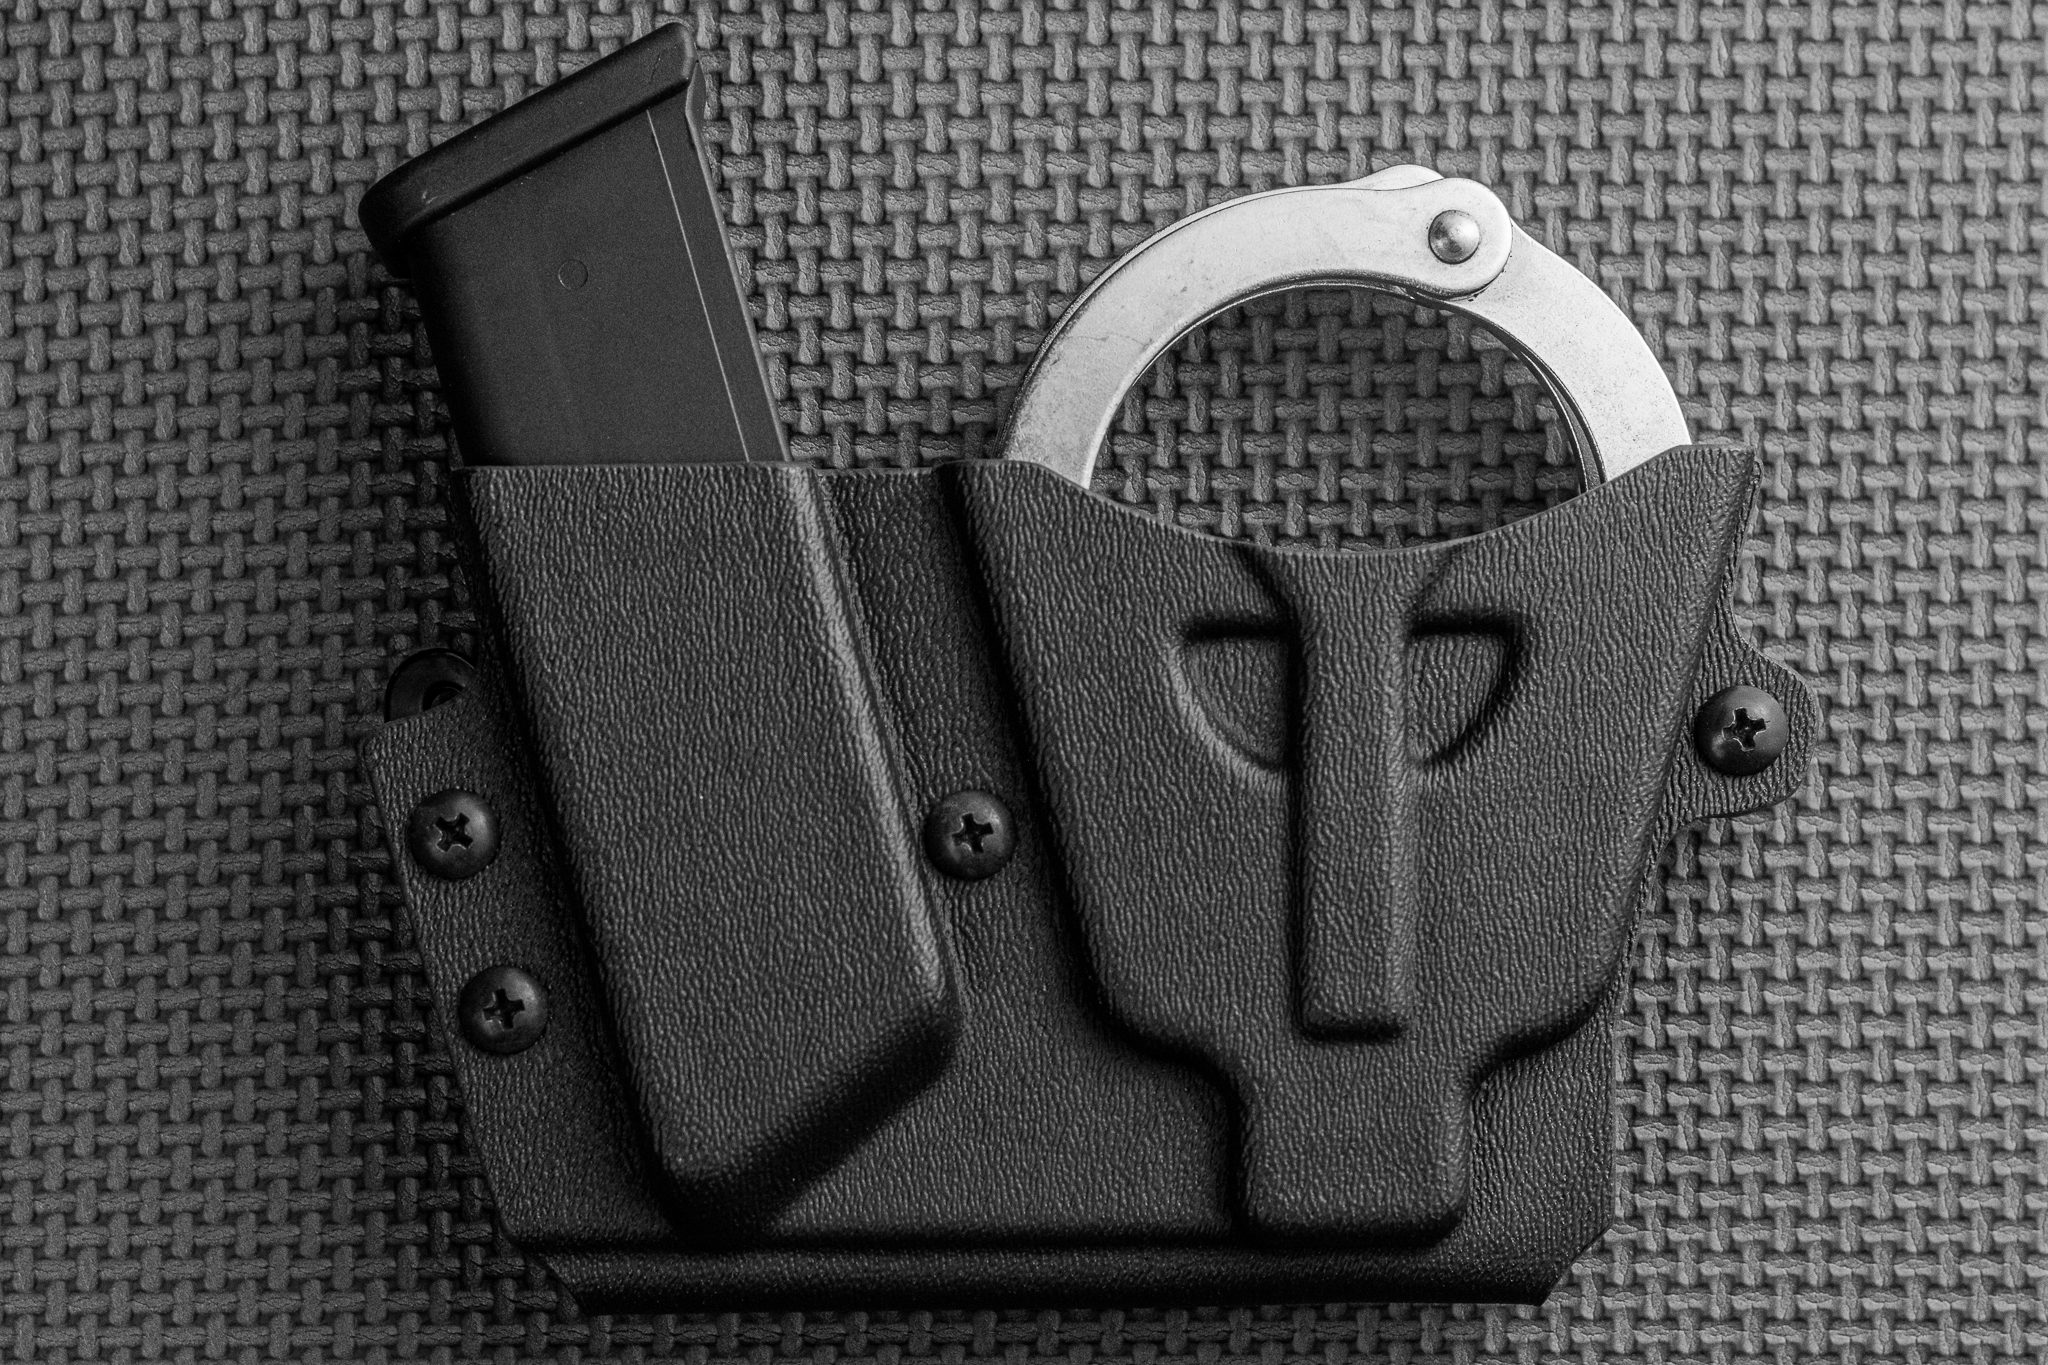 Kydex Handcuff Holster with 9/.40 Double Stack Mag Holder Combo Handcu